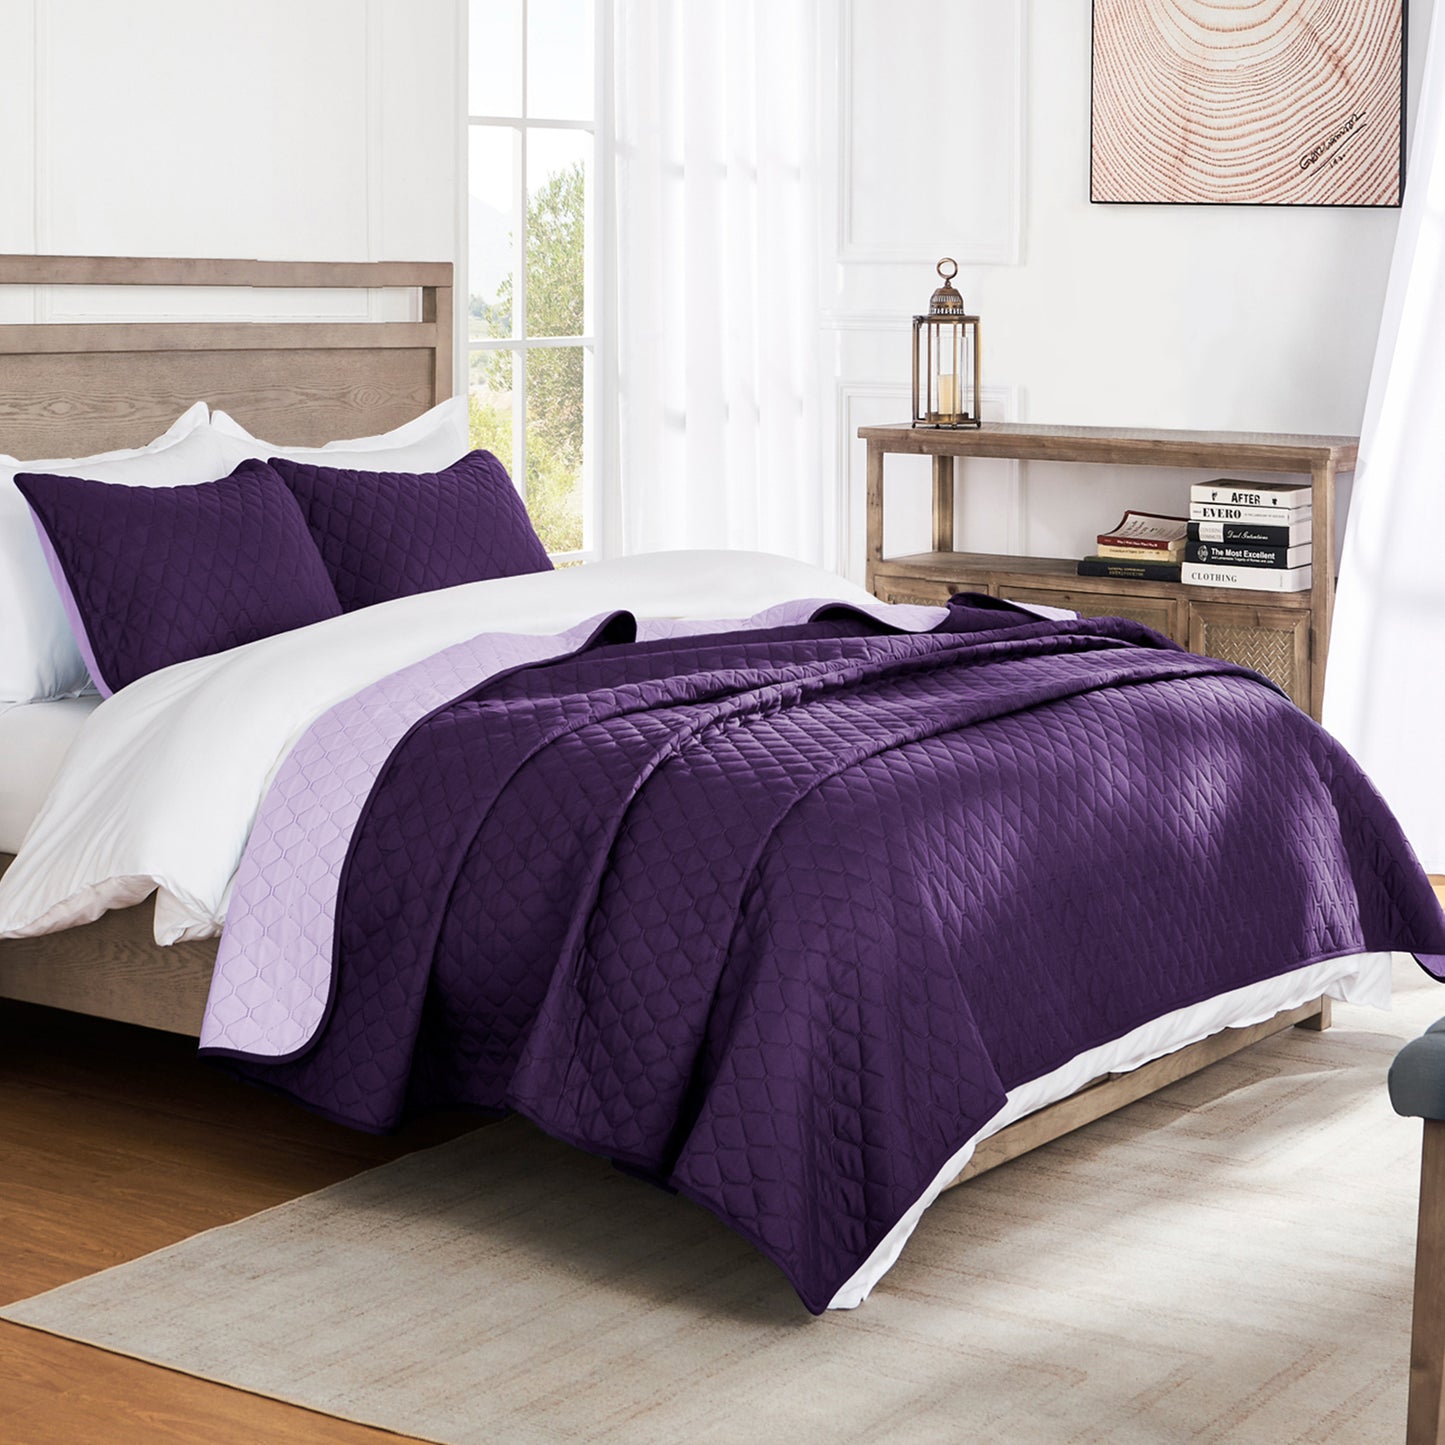 Exclusivo Mezcla Ultrasonic Reversible King Size Quilt Bedding Set with Pillow Shams, Lightweight Quilts King Size, Soft Bedspreads Bed Coverlets for All Seasons - (Deep Purple, 104"x96")